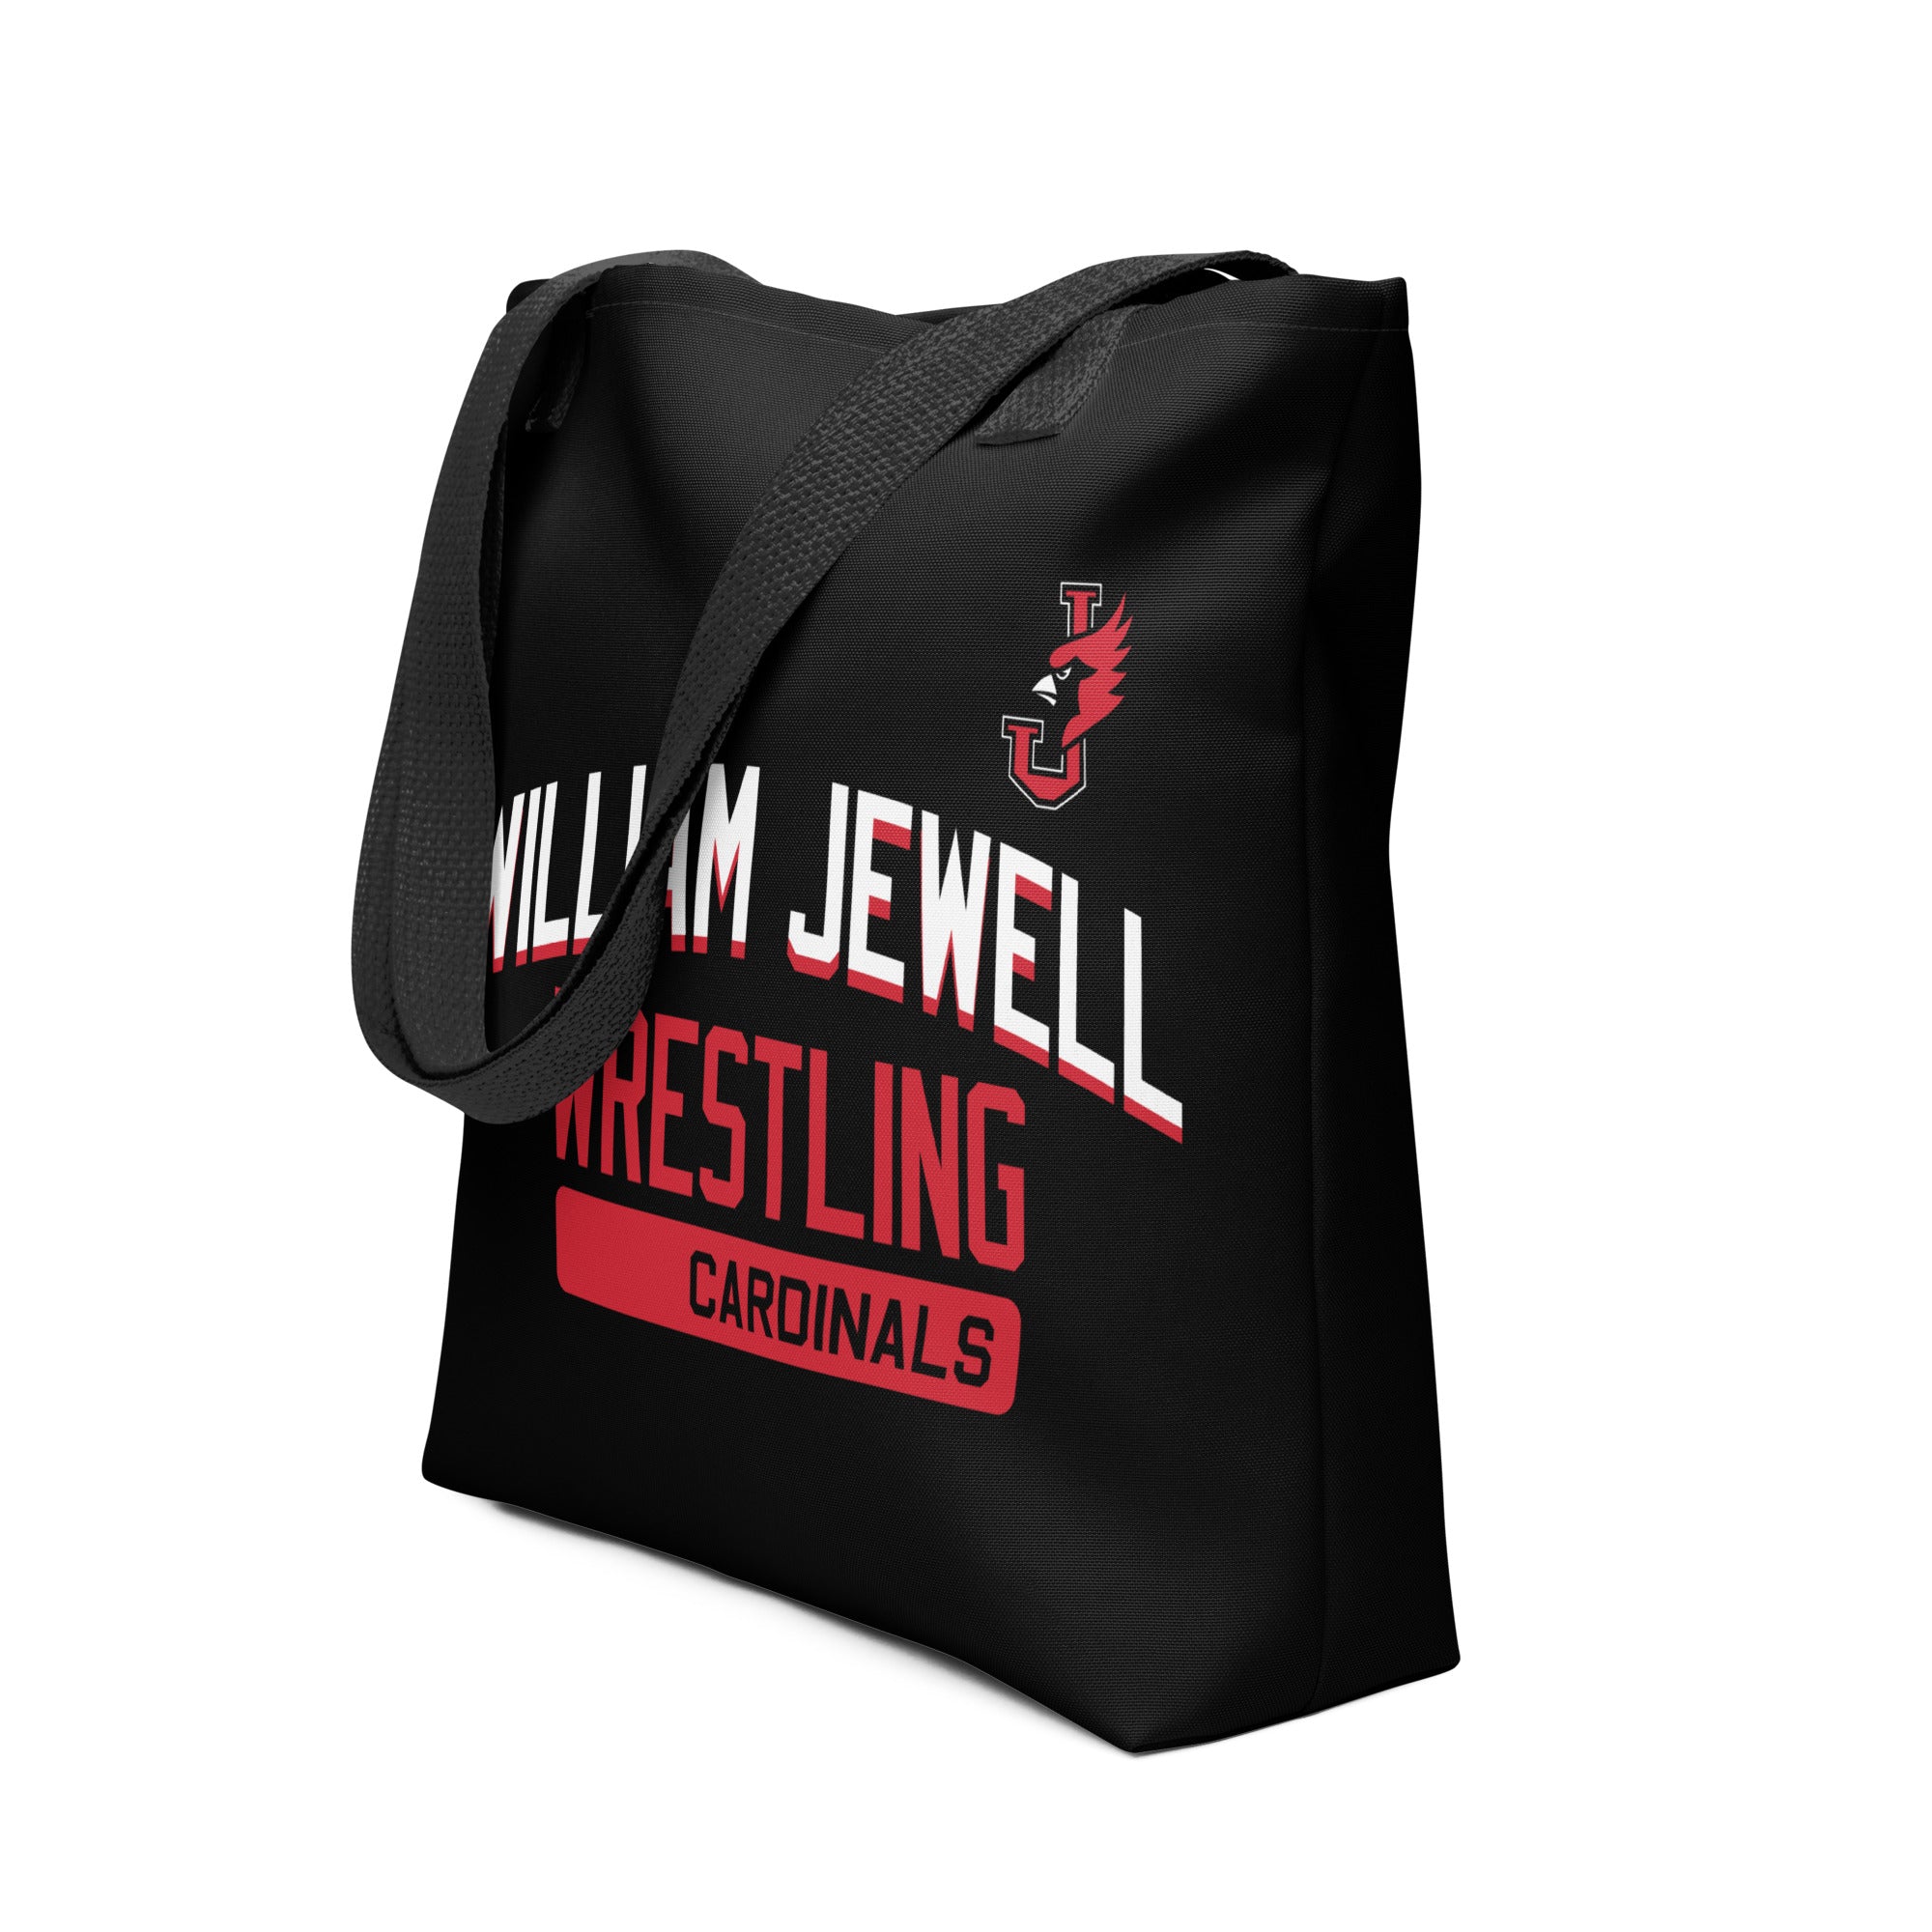 William Jewell Wrestling All Over Print Tote